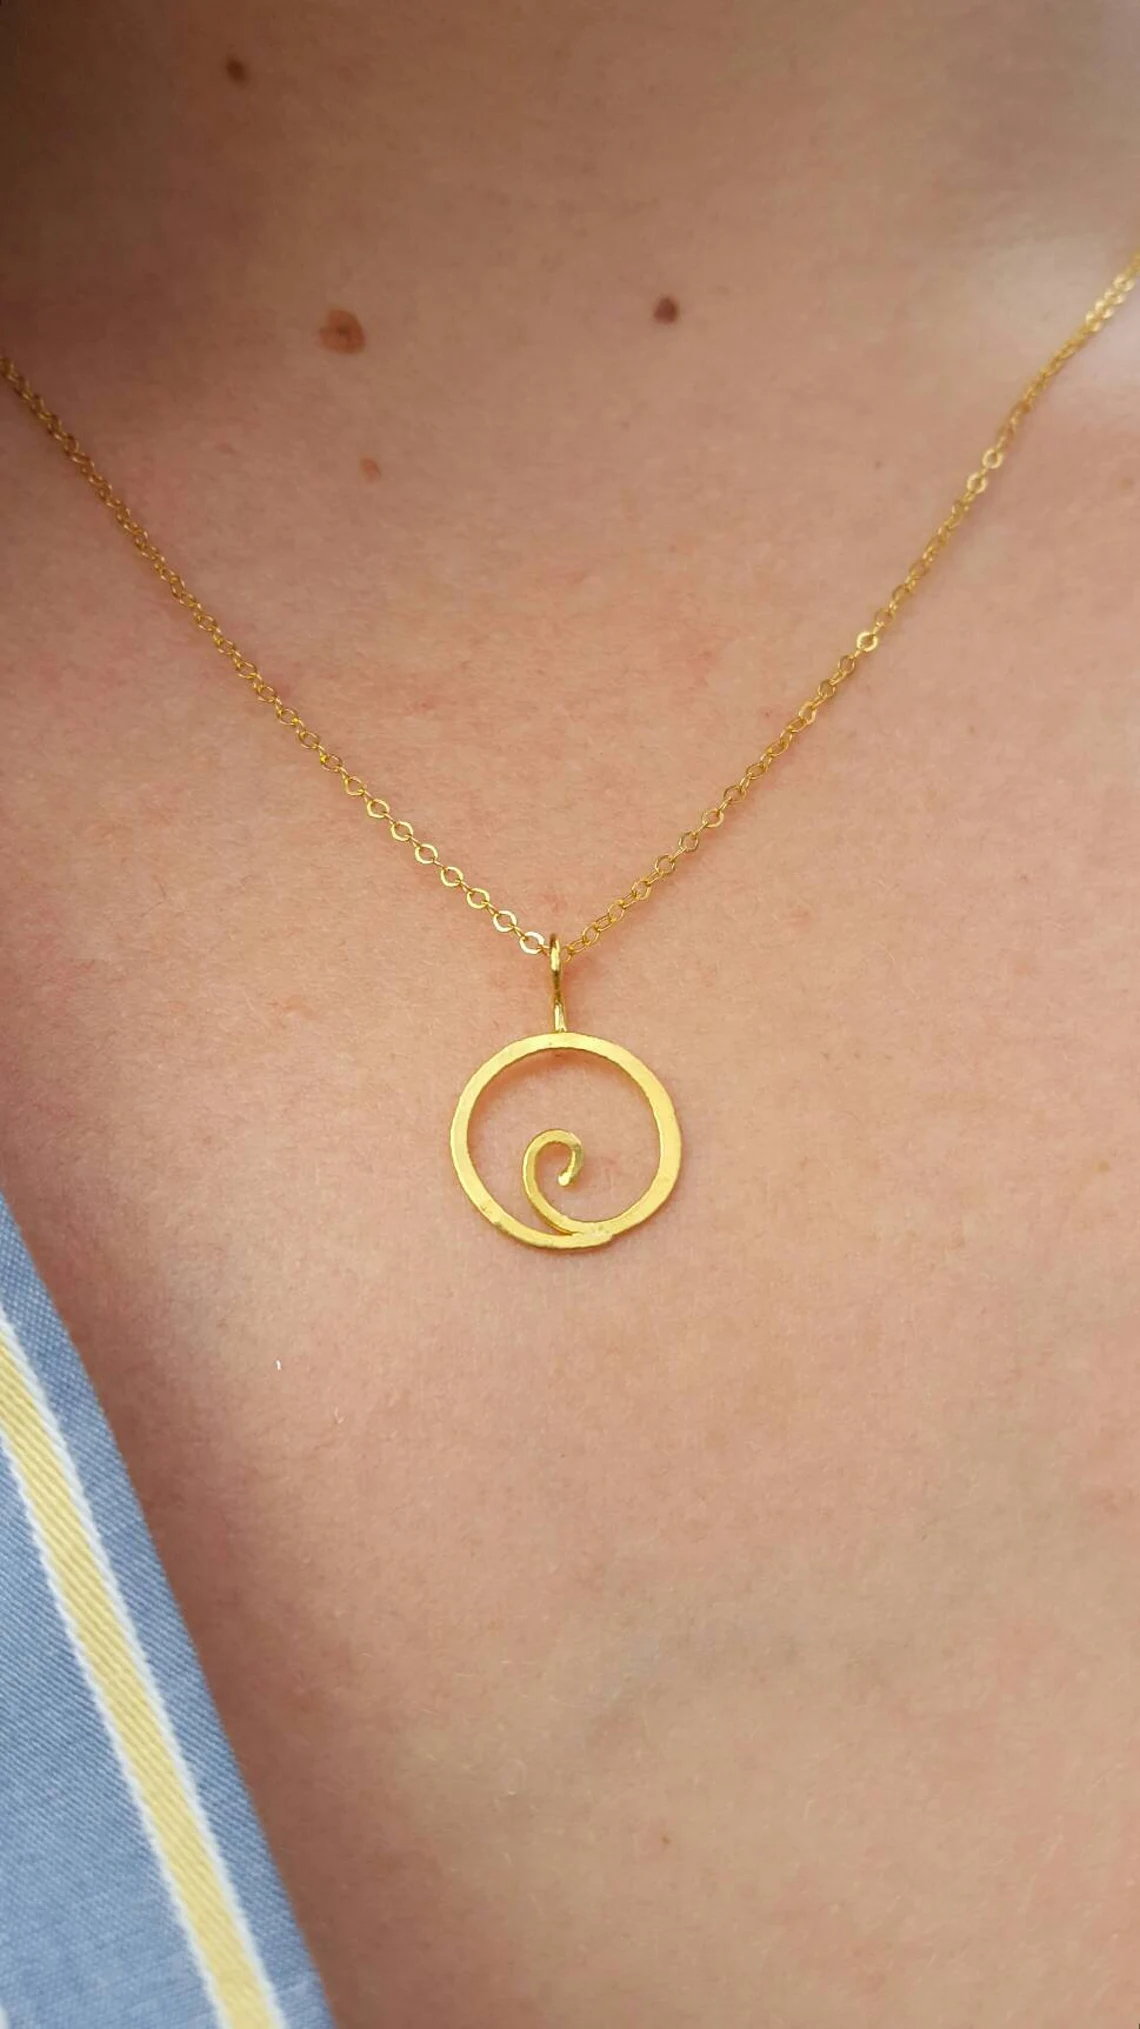 24k solid gold moon charm necklace